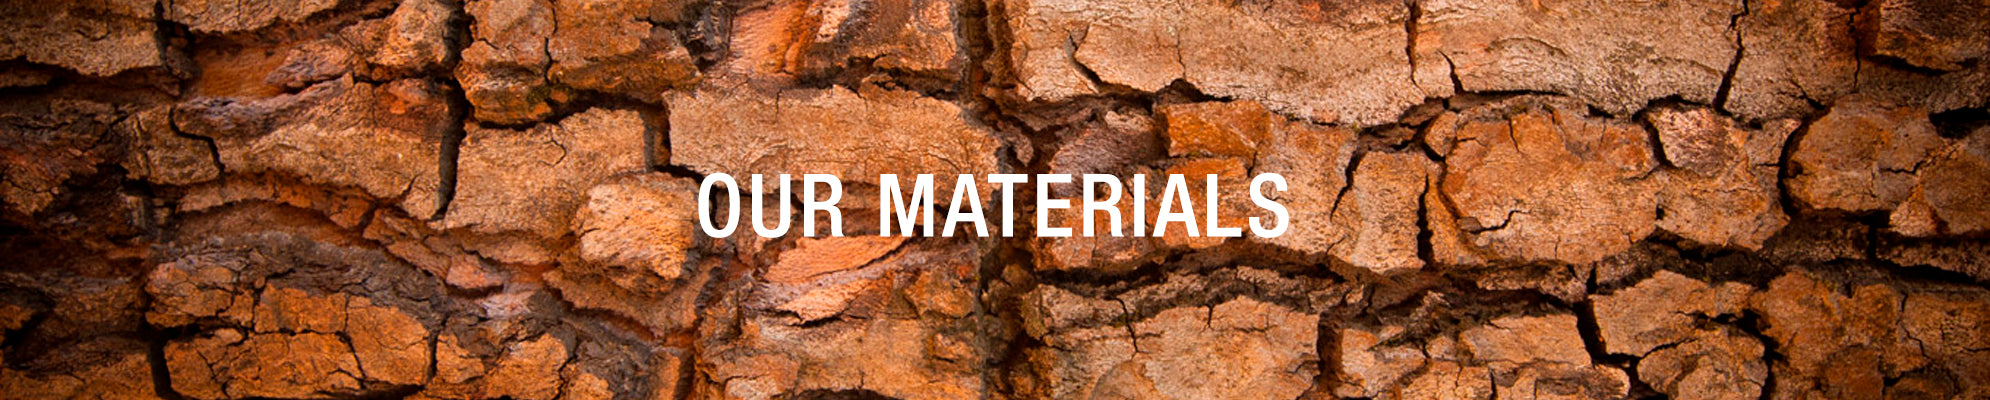 Materials-Video-Cover-Photo.jpg